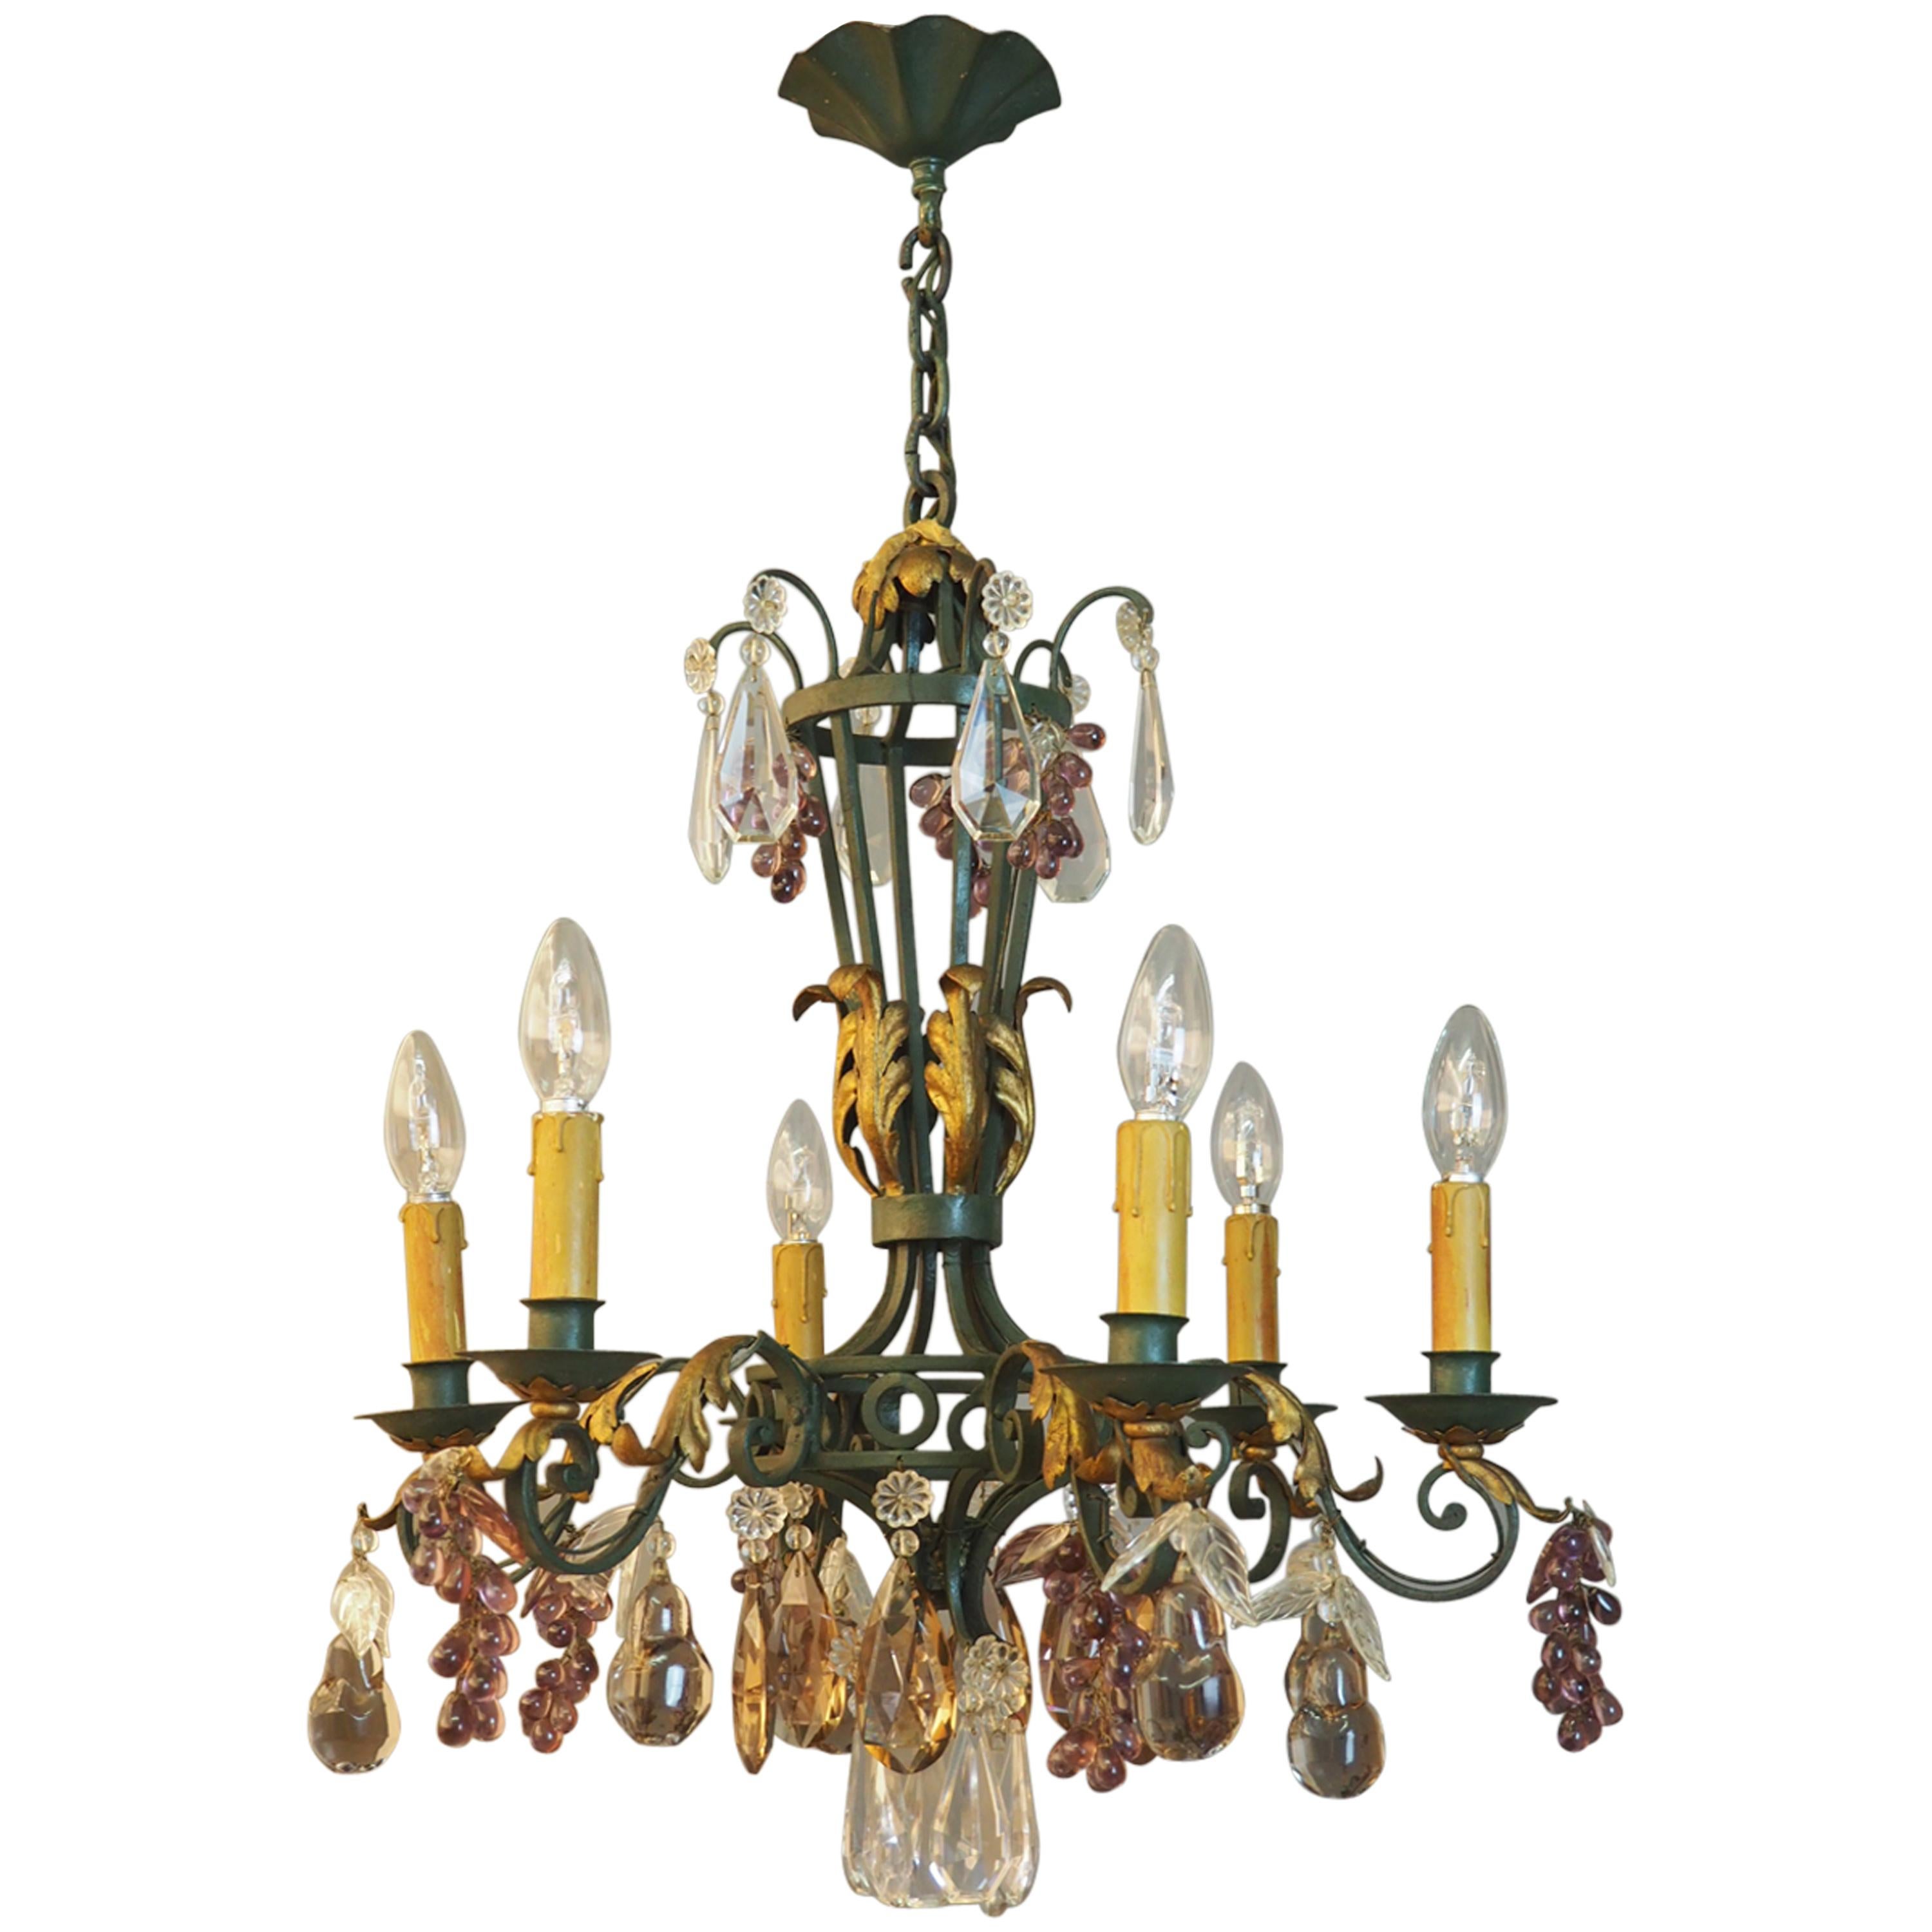 Green Painted and Gilt Wrought Iron Amethyst Chandelier with Fruits, 1900s